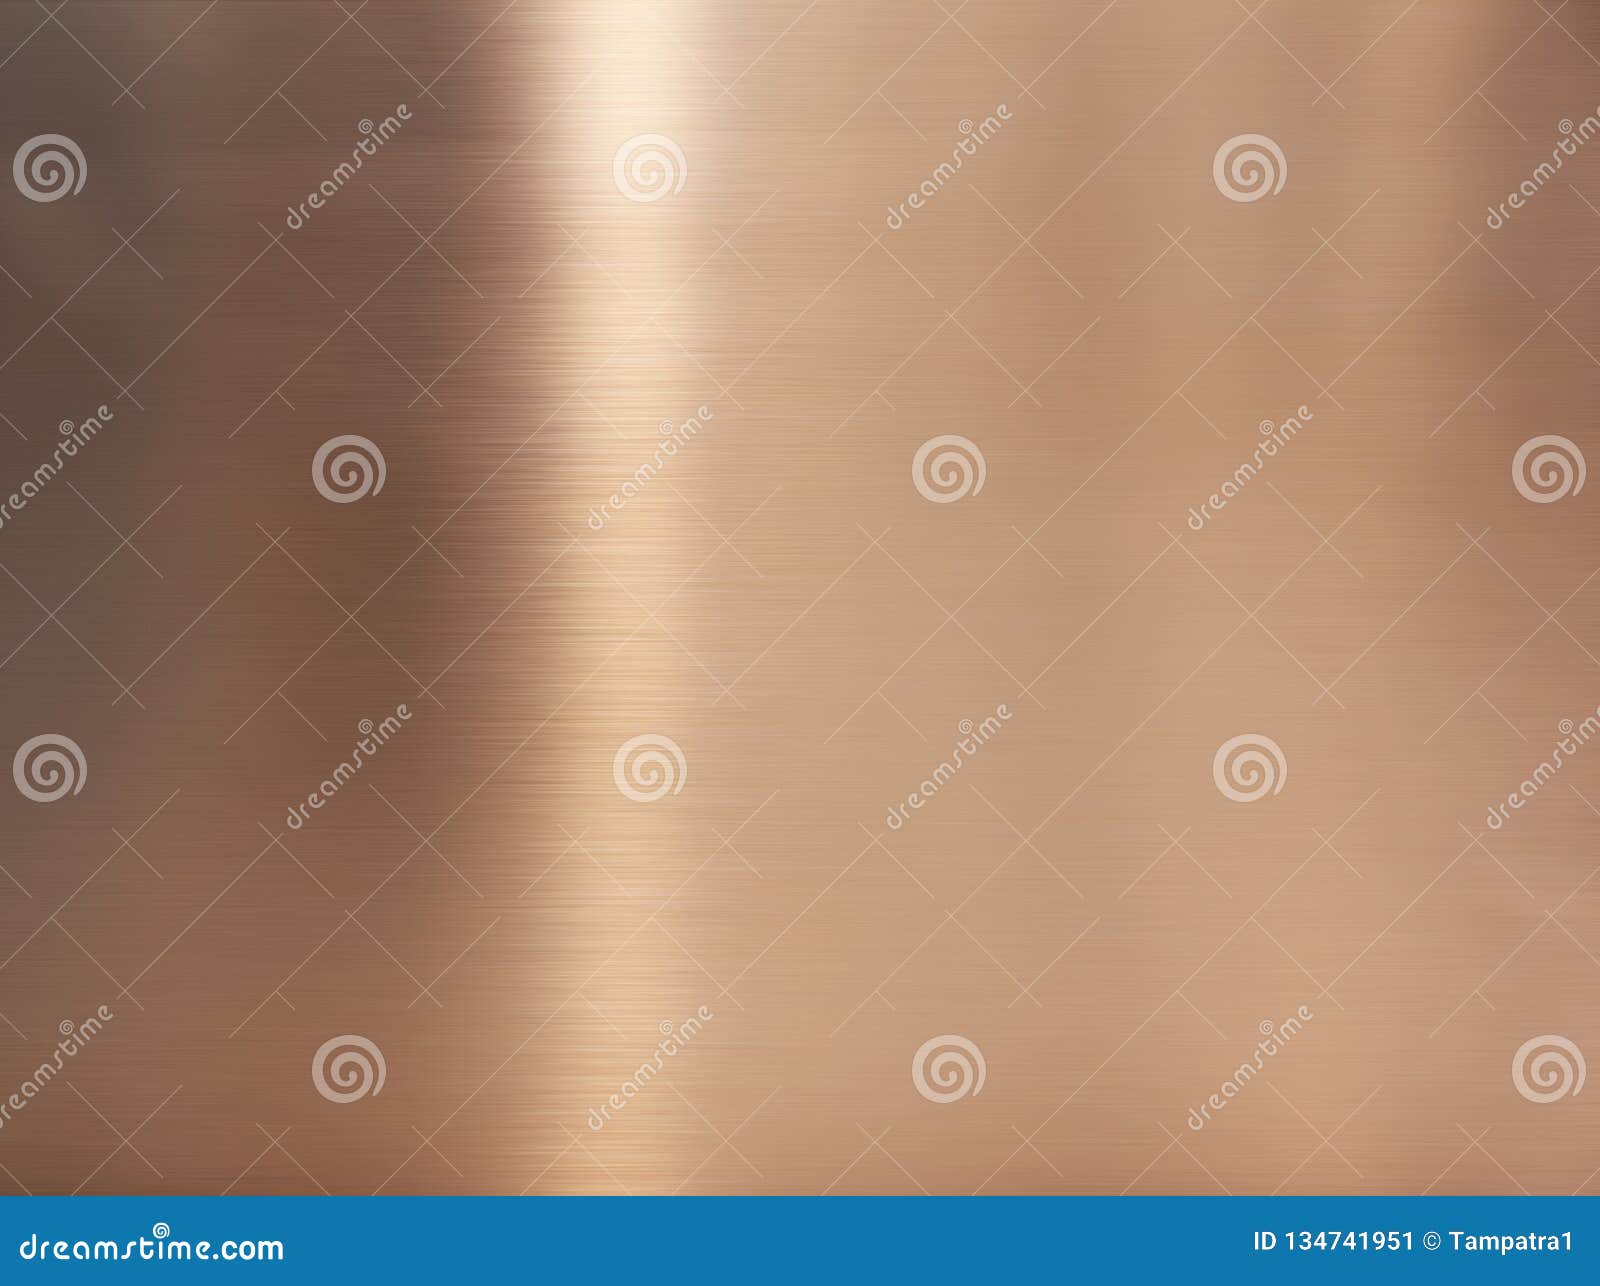 golden hairline stainless steel. shiny gold foil, bronze, or copper metal pattern surface texture. close-up of interior material